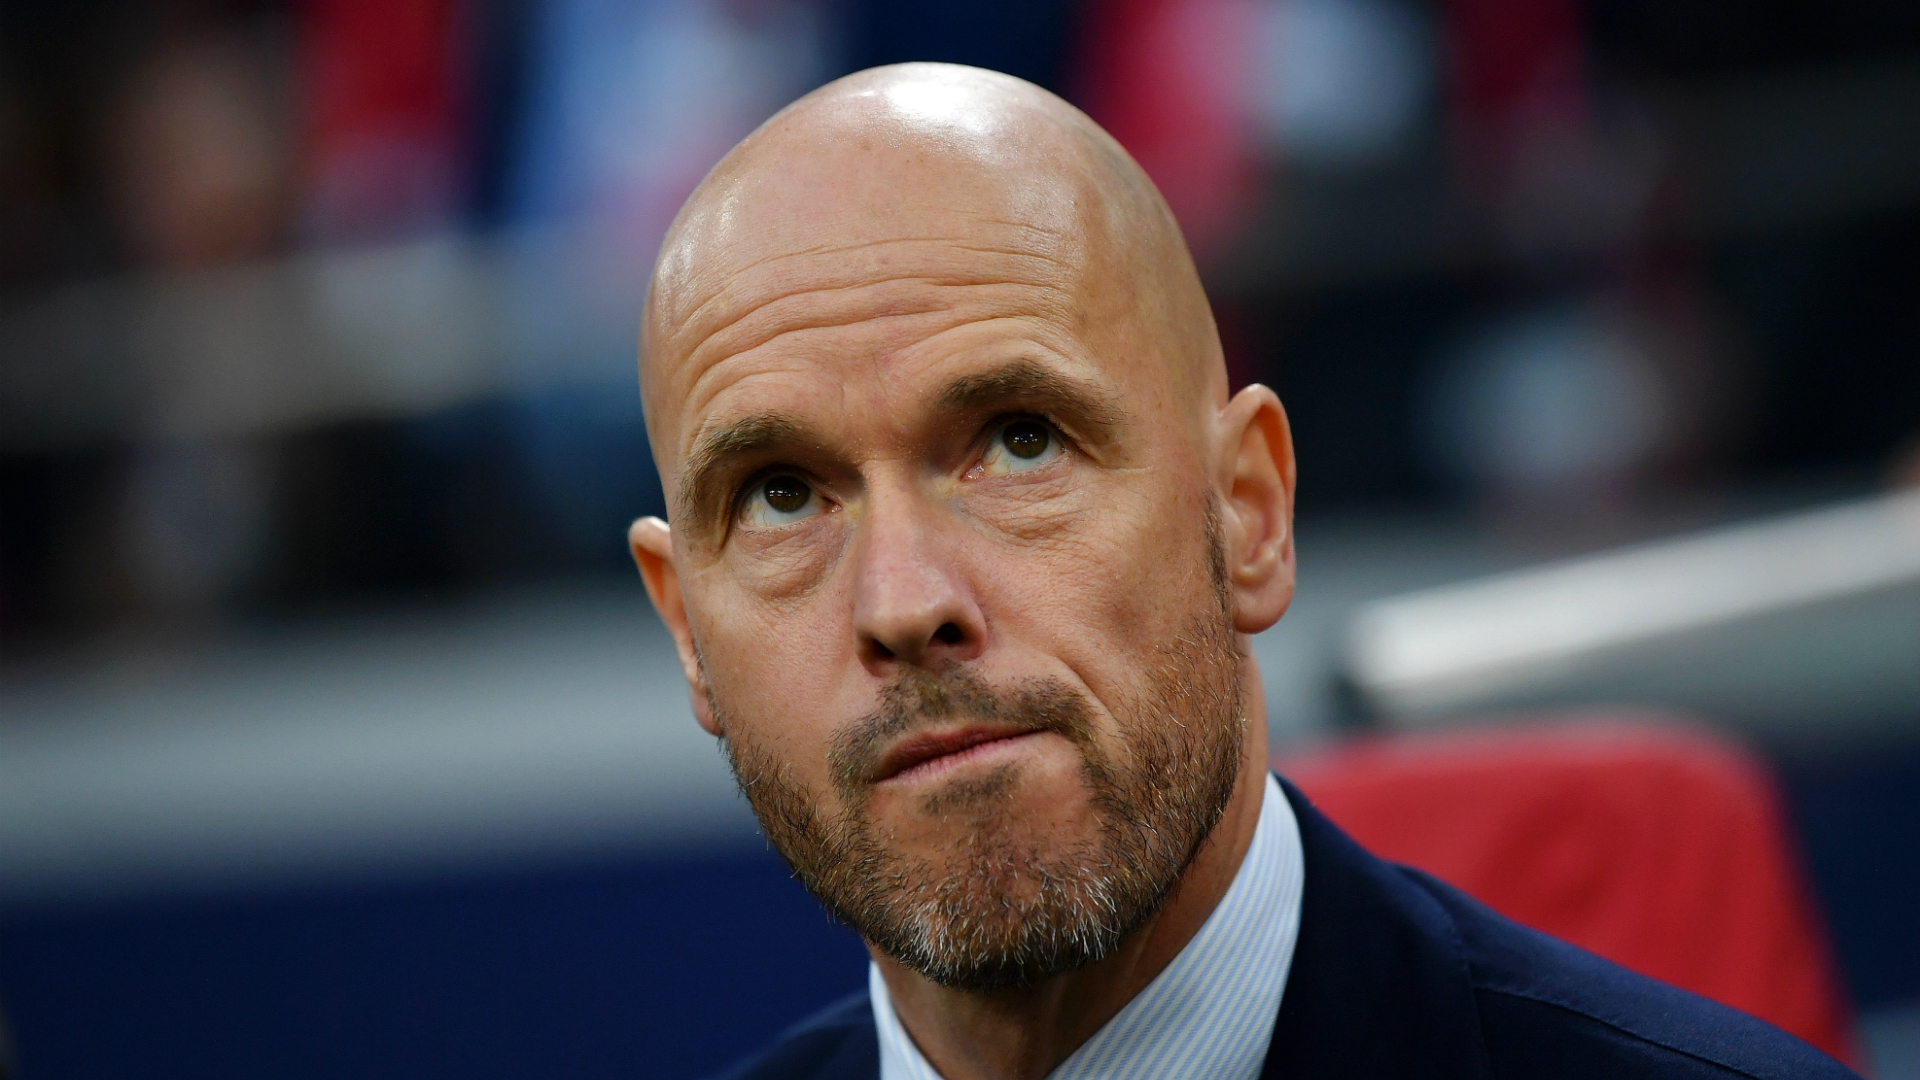 Ajax failed to advance in the Champions League despite claiming 10 points, leaving head coach Erik ten Hag frustrated.